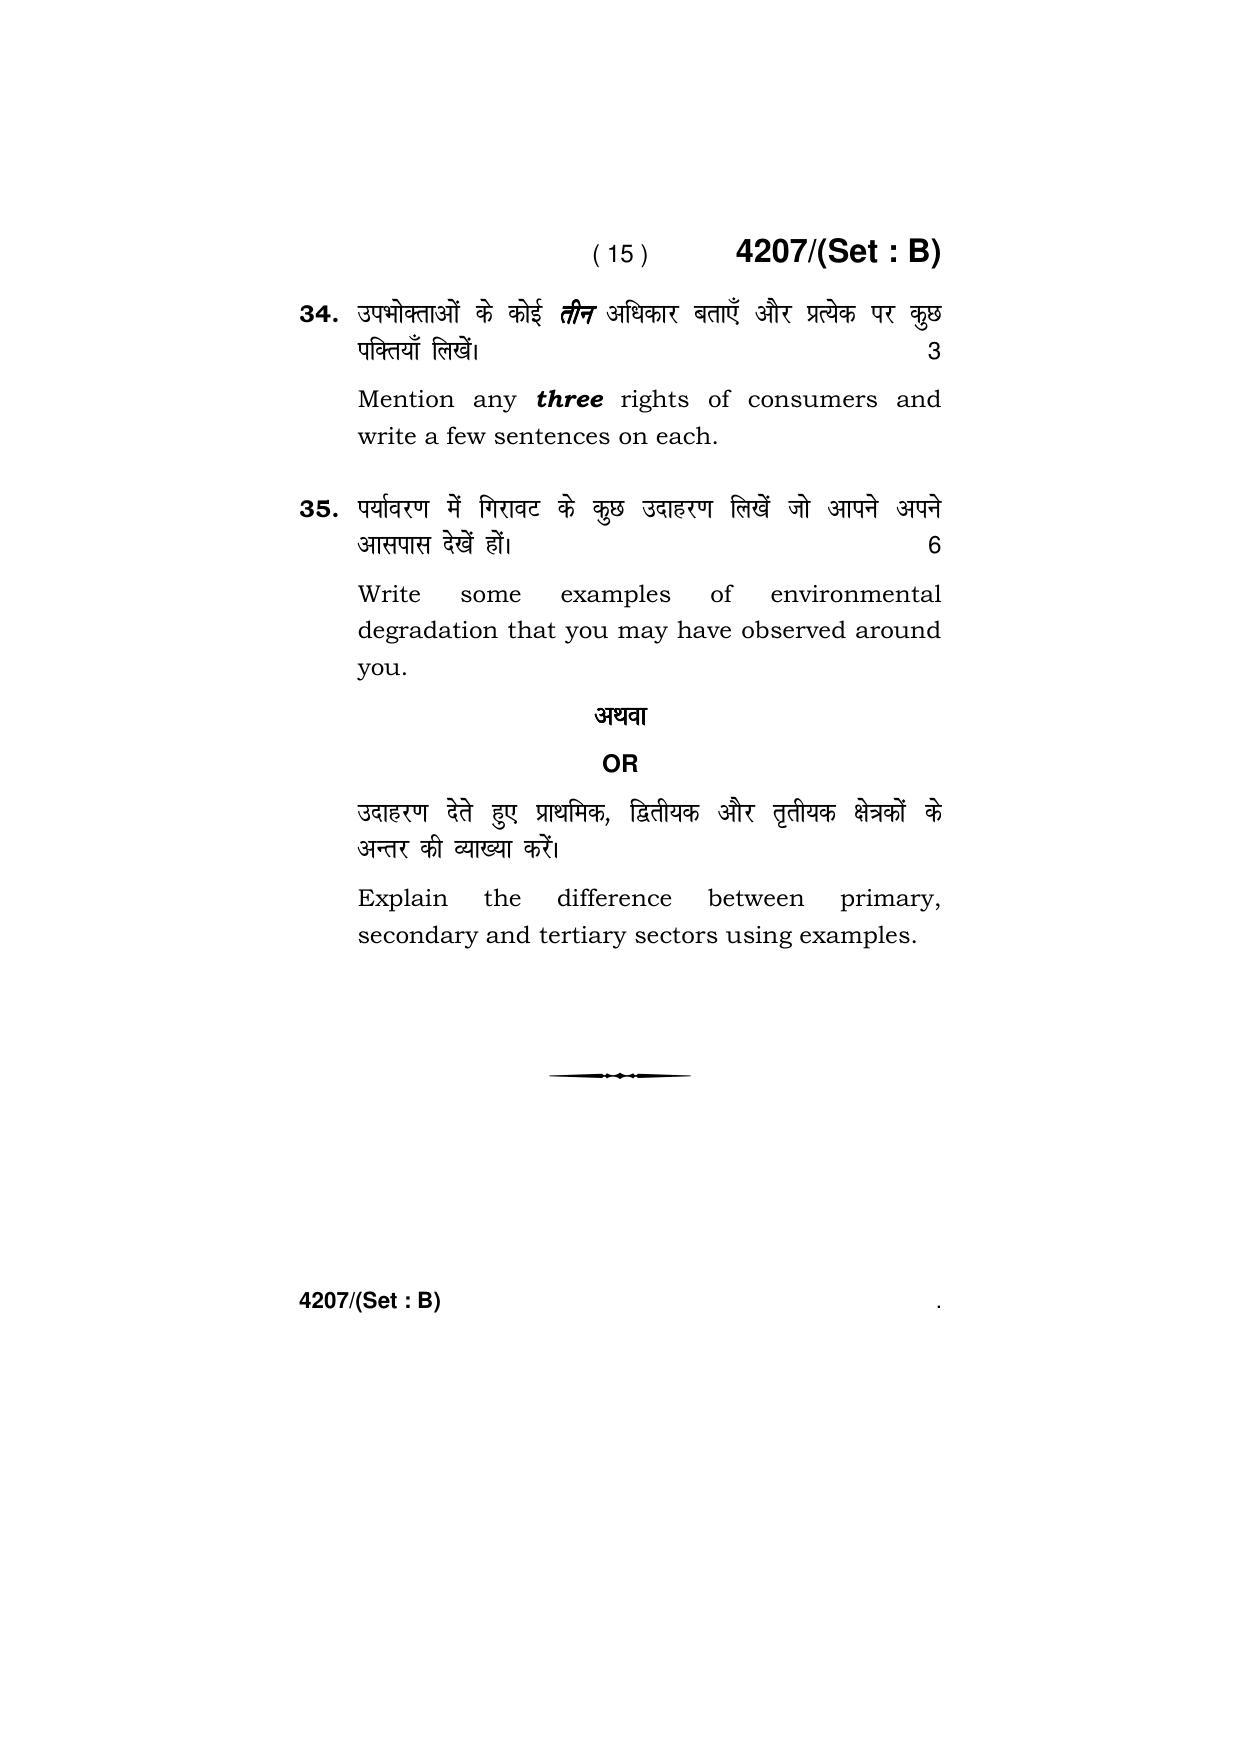 Haryana Board HBSE Class 10 Social Science (All Set) 2019 Question Paper - Page 30